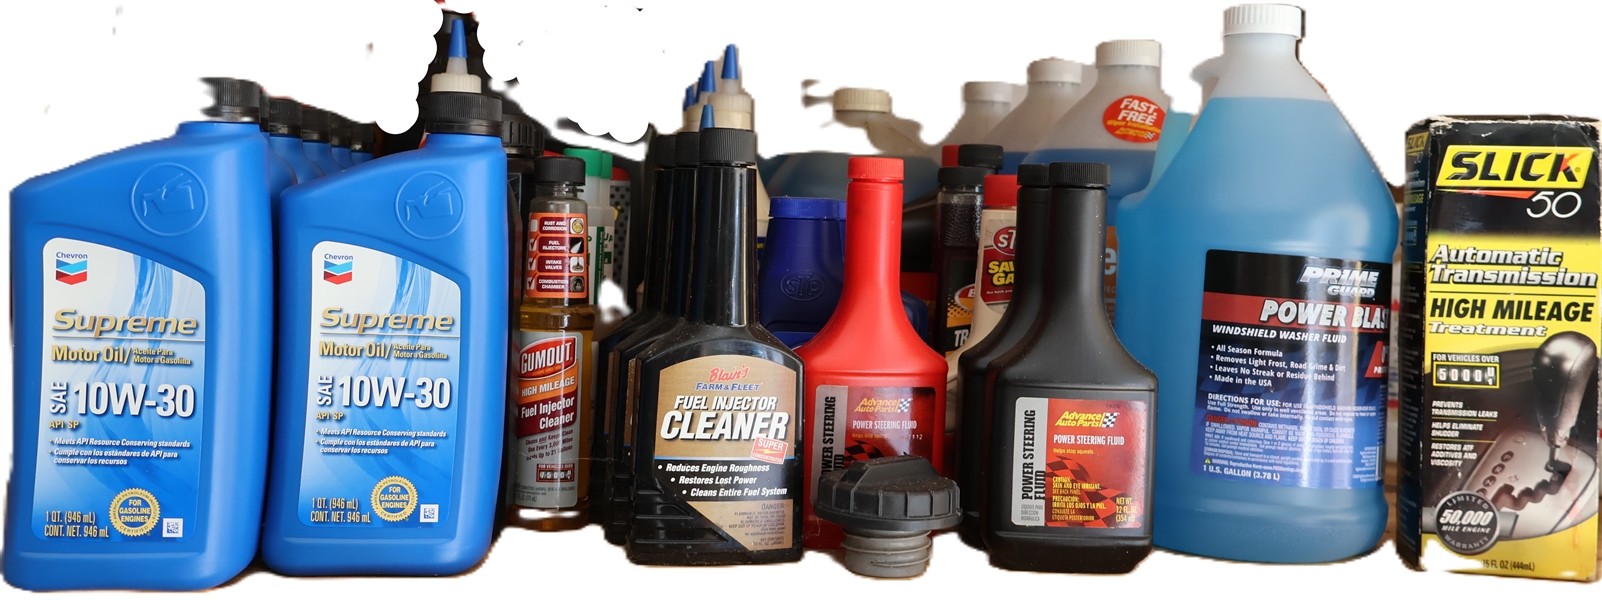 Huge Lot of NEW FULL Car Related Products - Windshield Washer Fluid, Power Steering Fluid, STP Oil Treatment, Fuel Injector Treatment, High Mileage Fuel Injector Cleaner, Supreme 10W-30 Motor Oil,...